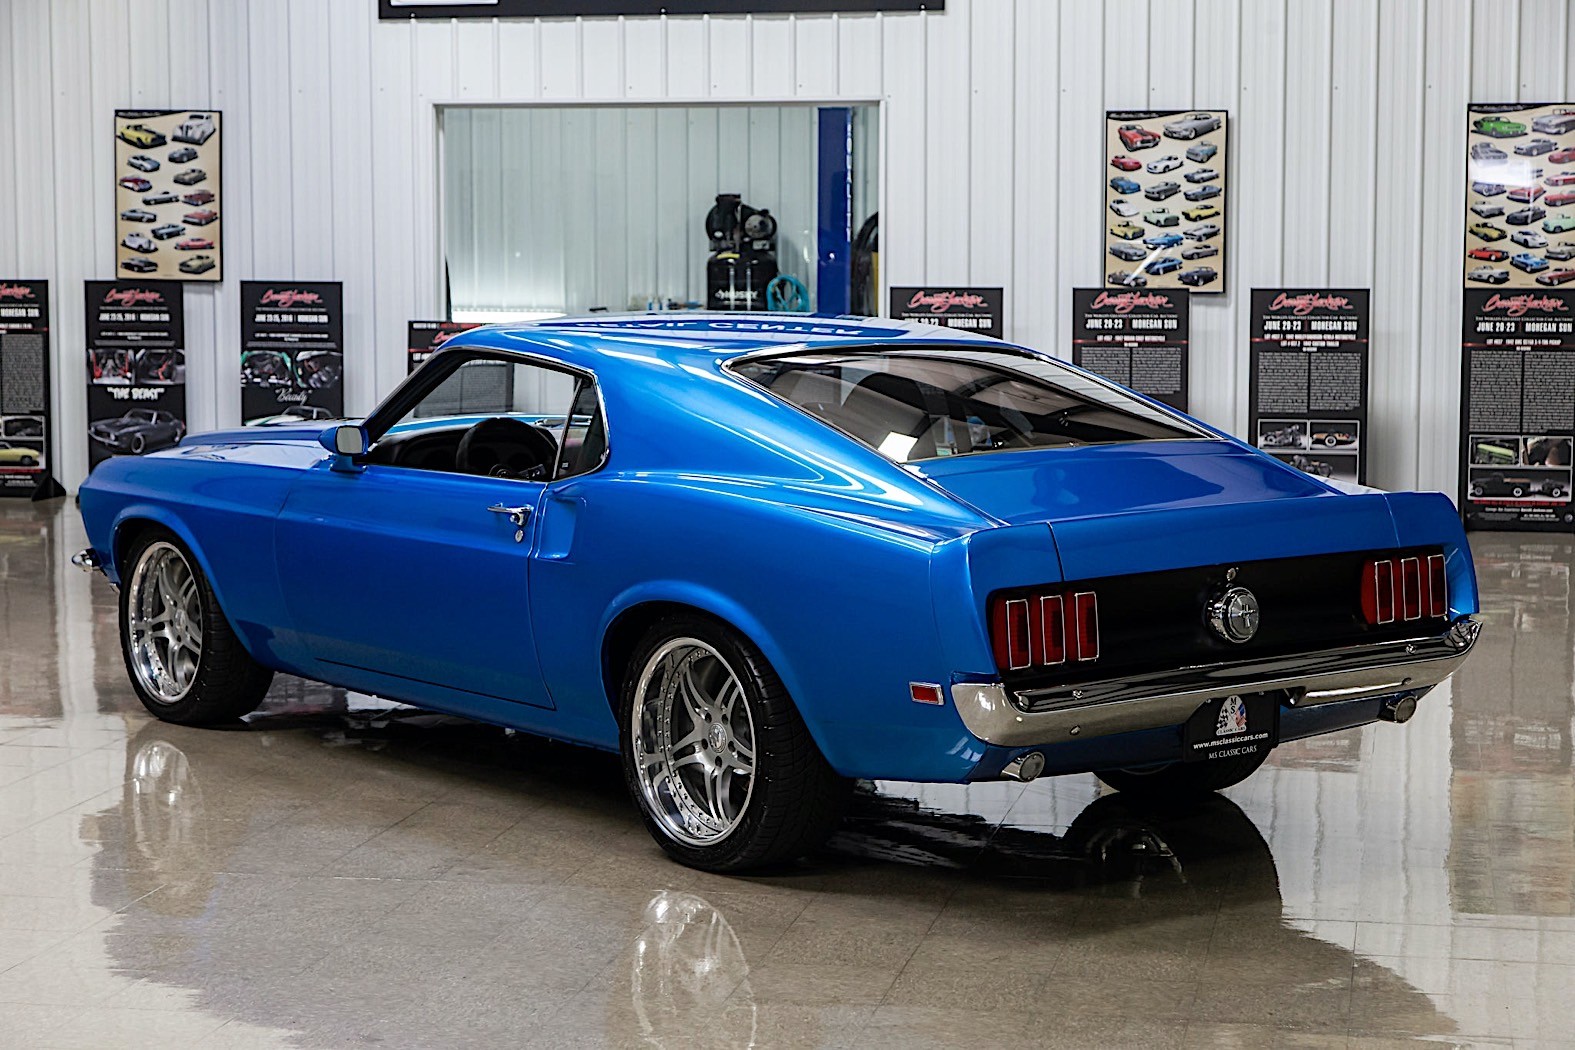 Track-Built 1969 Ford Mustang Fastback Gets 530 HP of Coyote Power ...